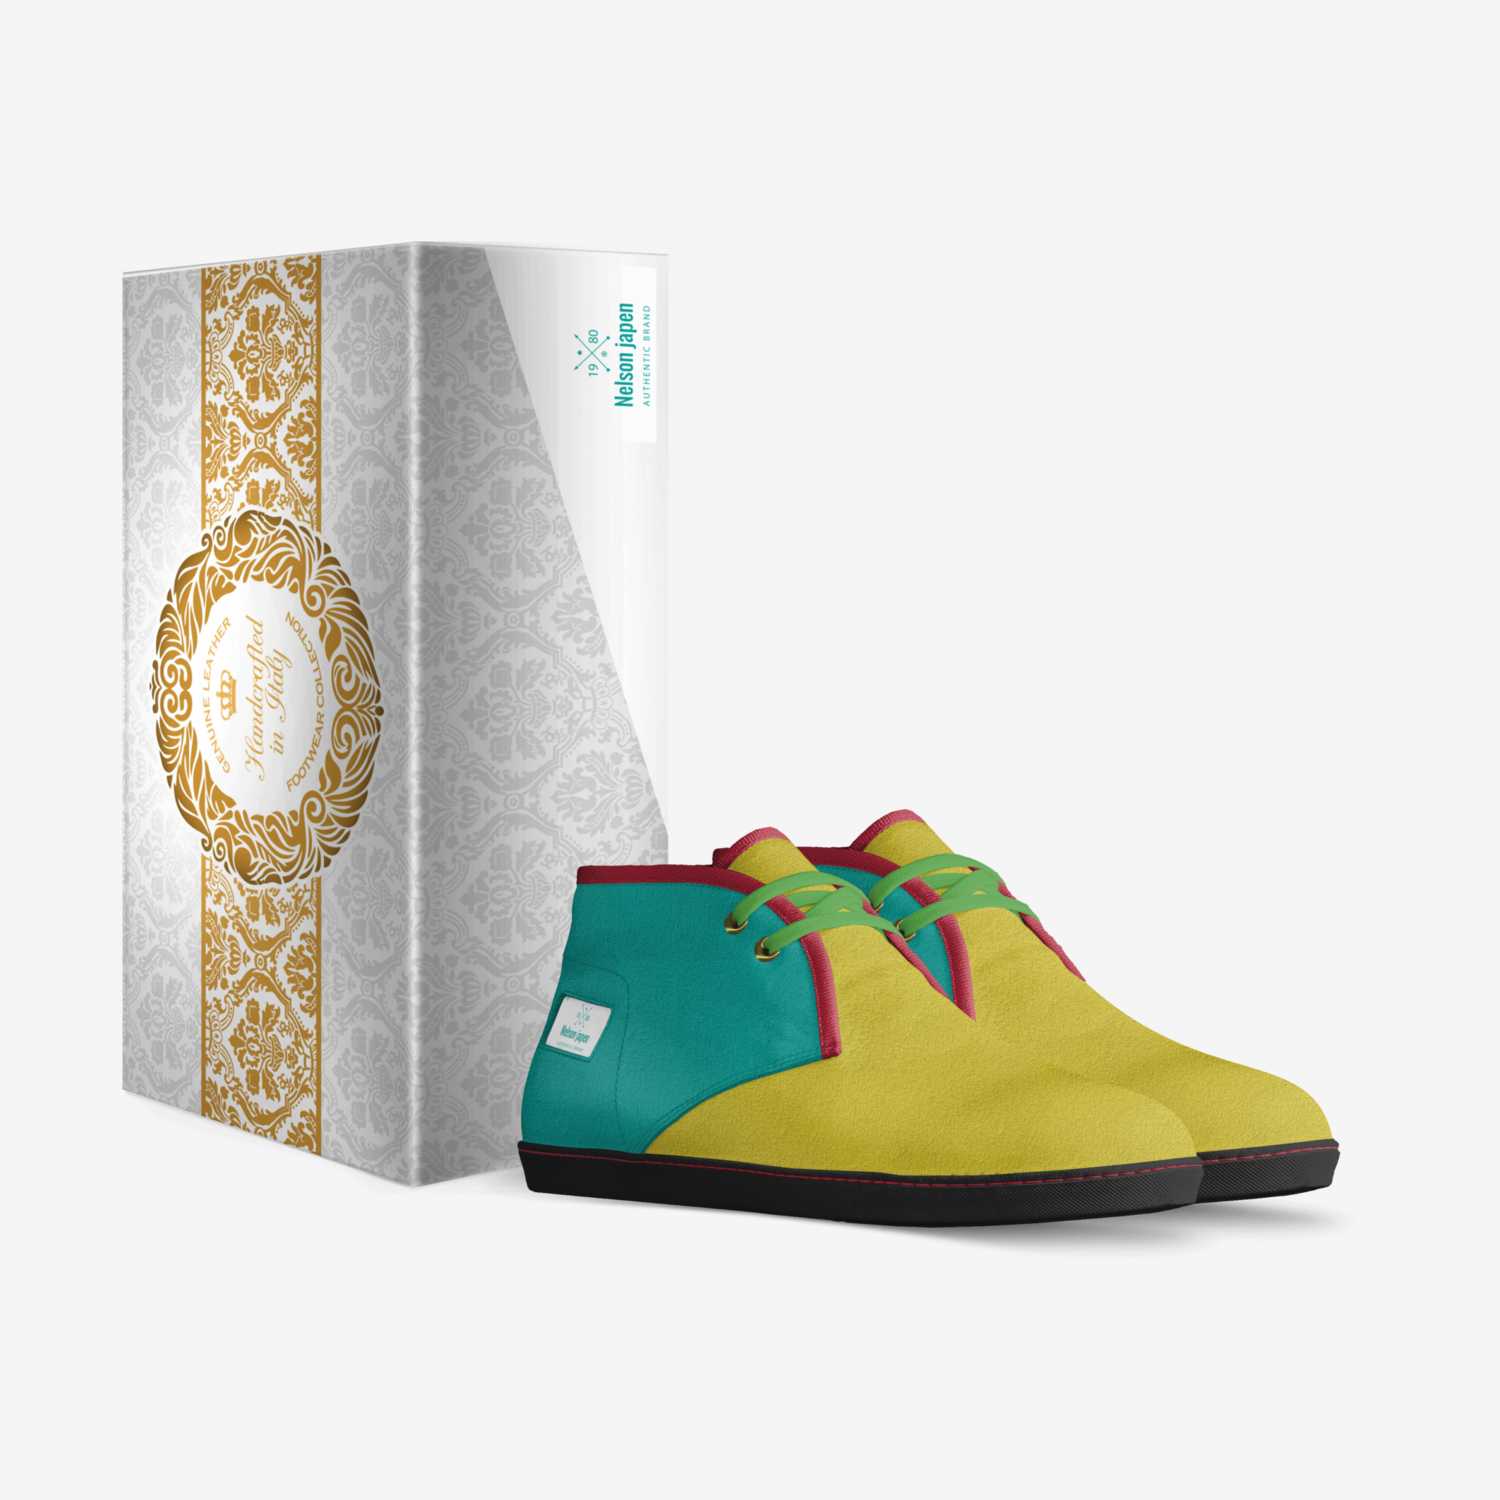 Nelson japen custom made in Italy shoes by Obadiah Nelson | Box view